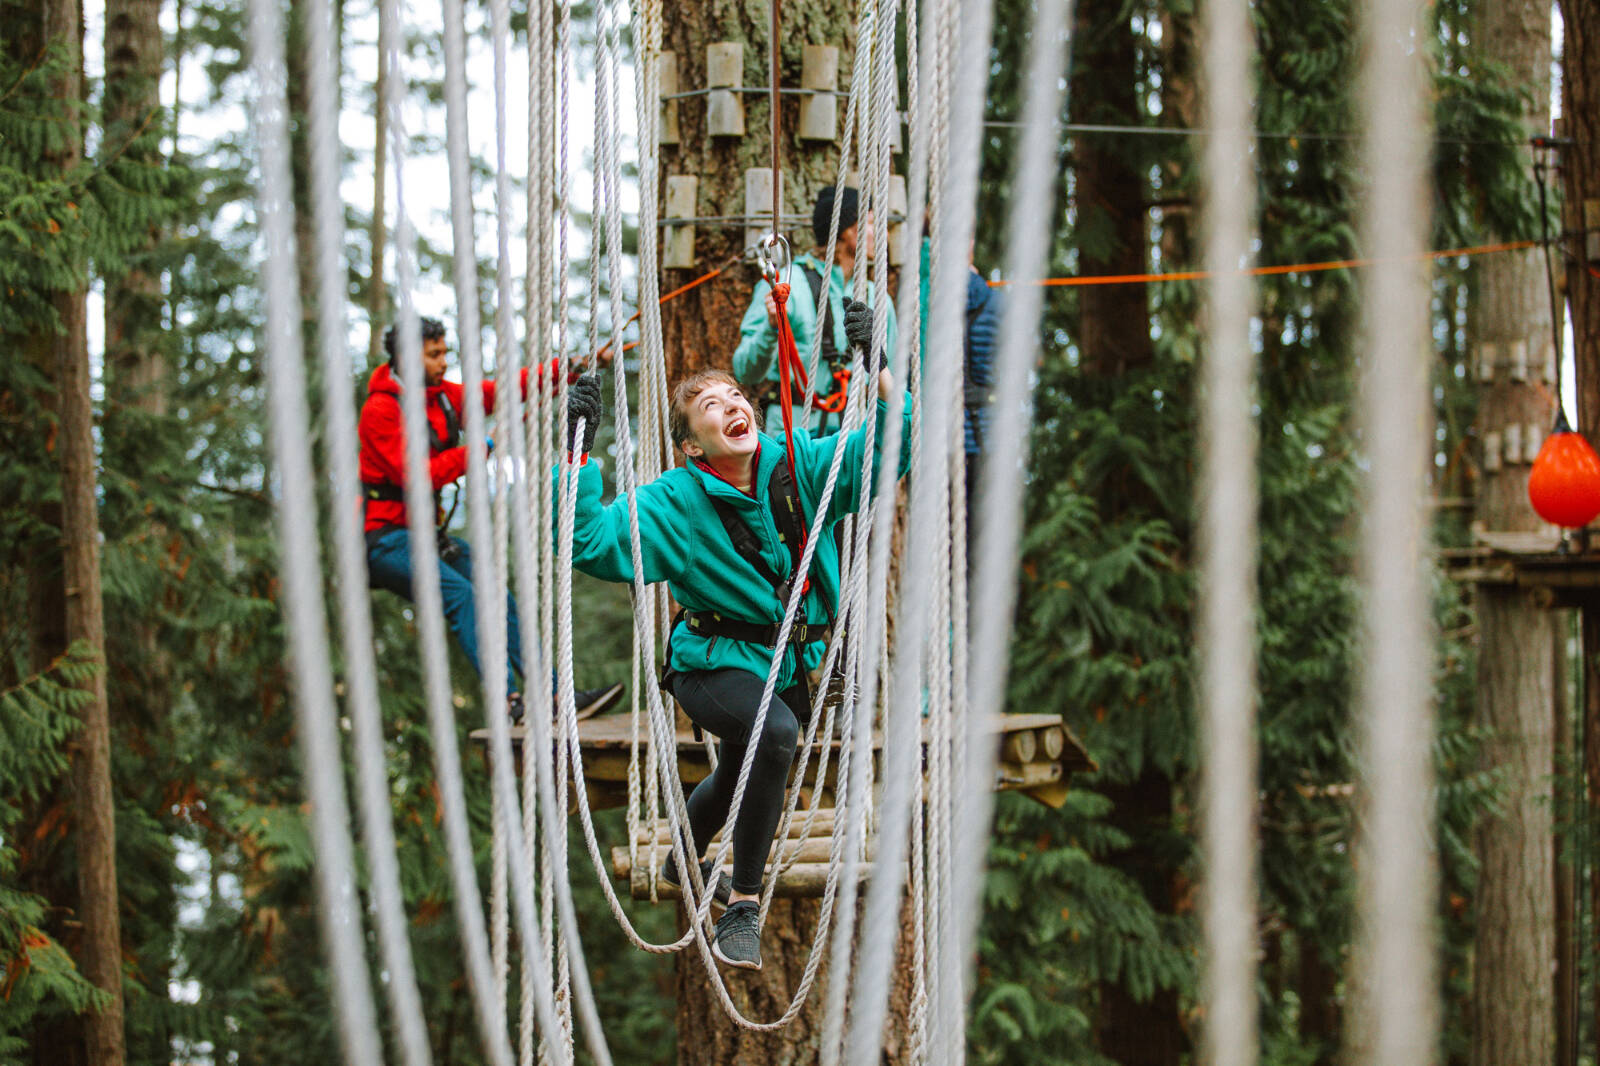 Navigate obstacles of increasing height and difficulty on WildPlays Adventure Courses. Photo courtesy WildPlay